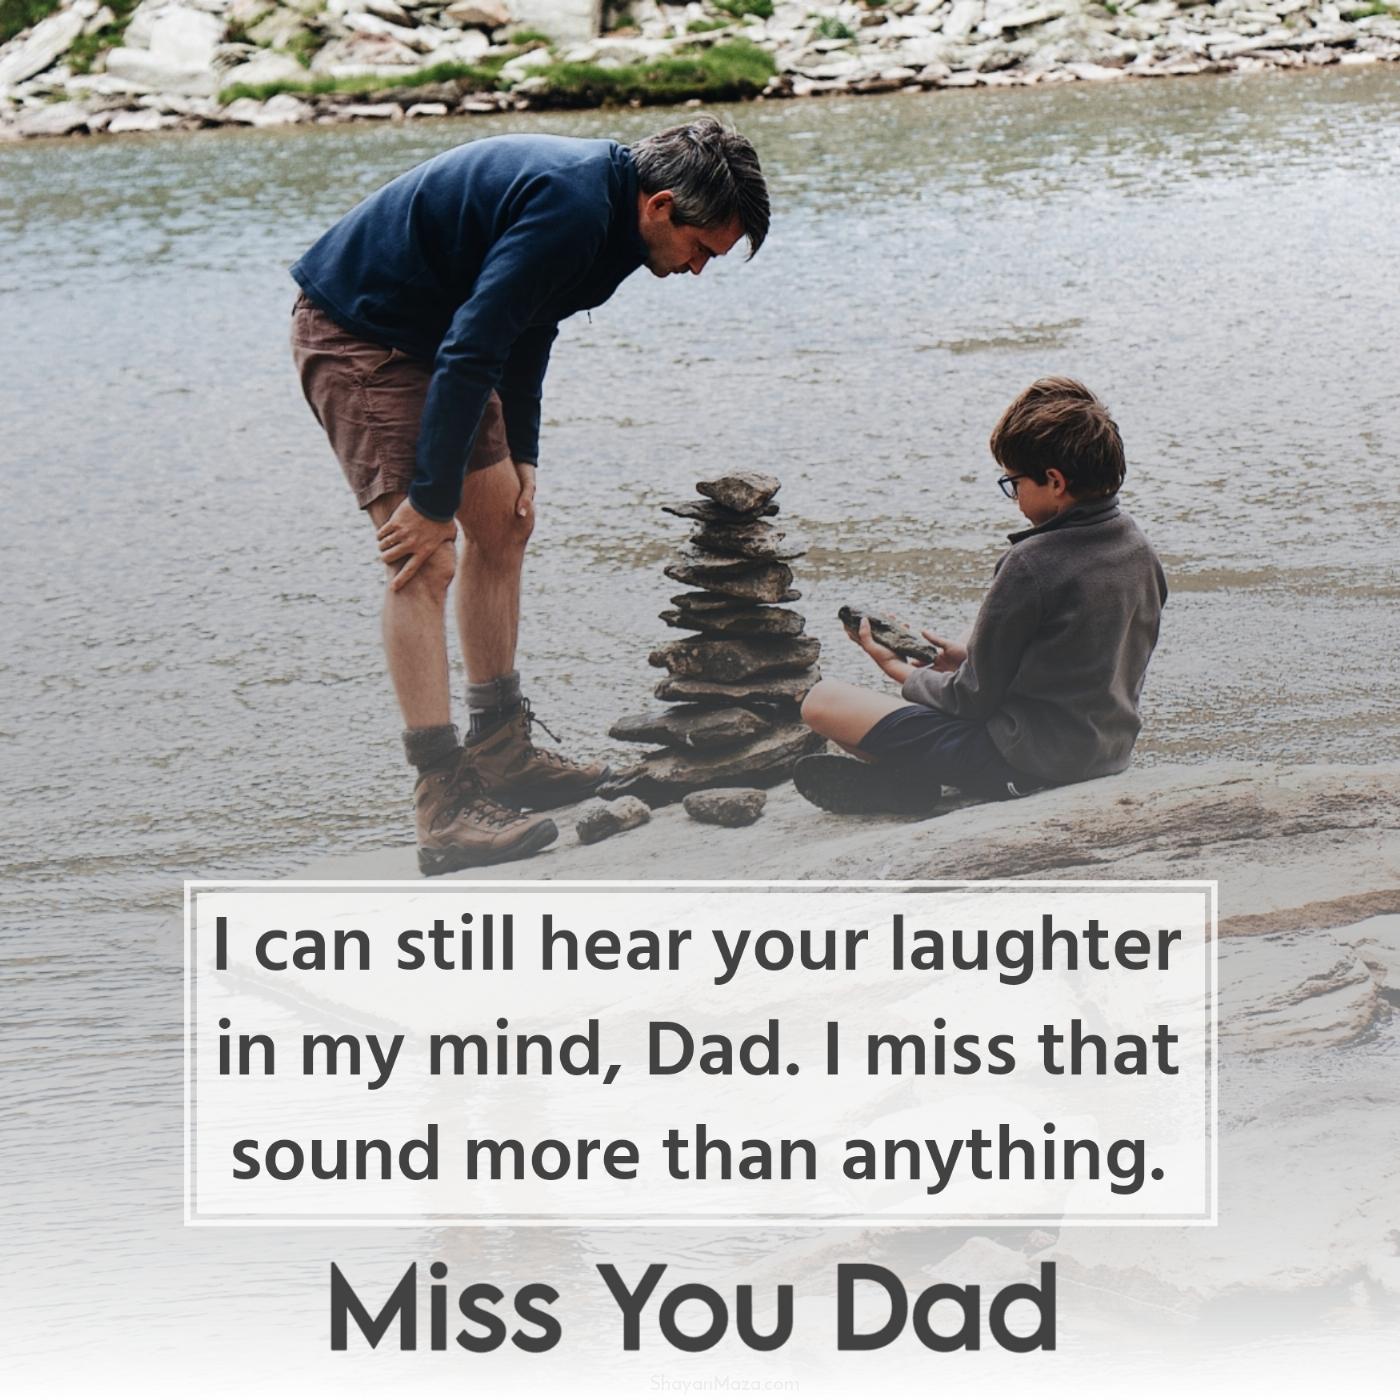 I can still hear your laughter in my mind Dad